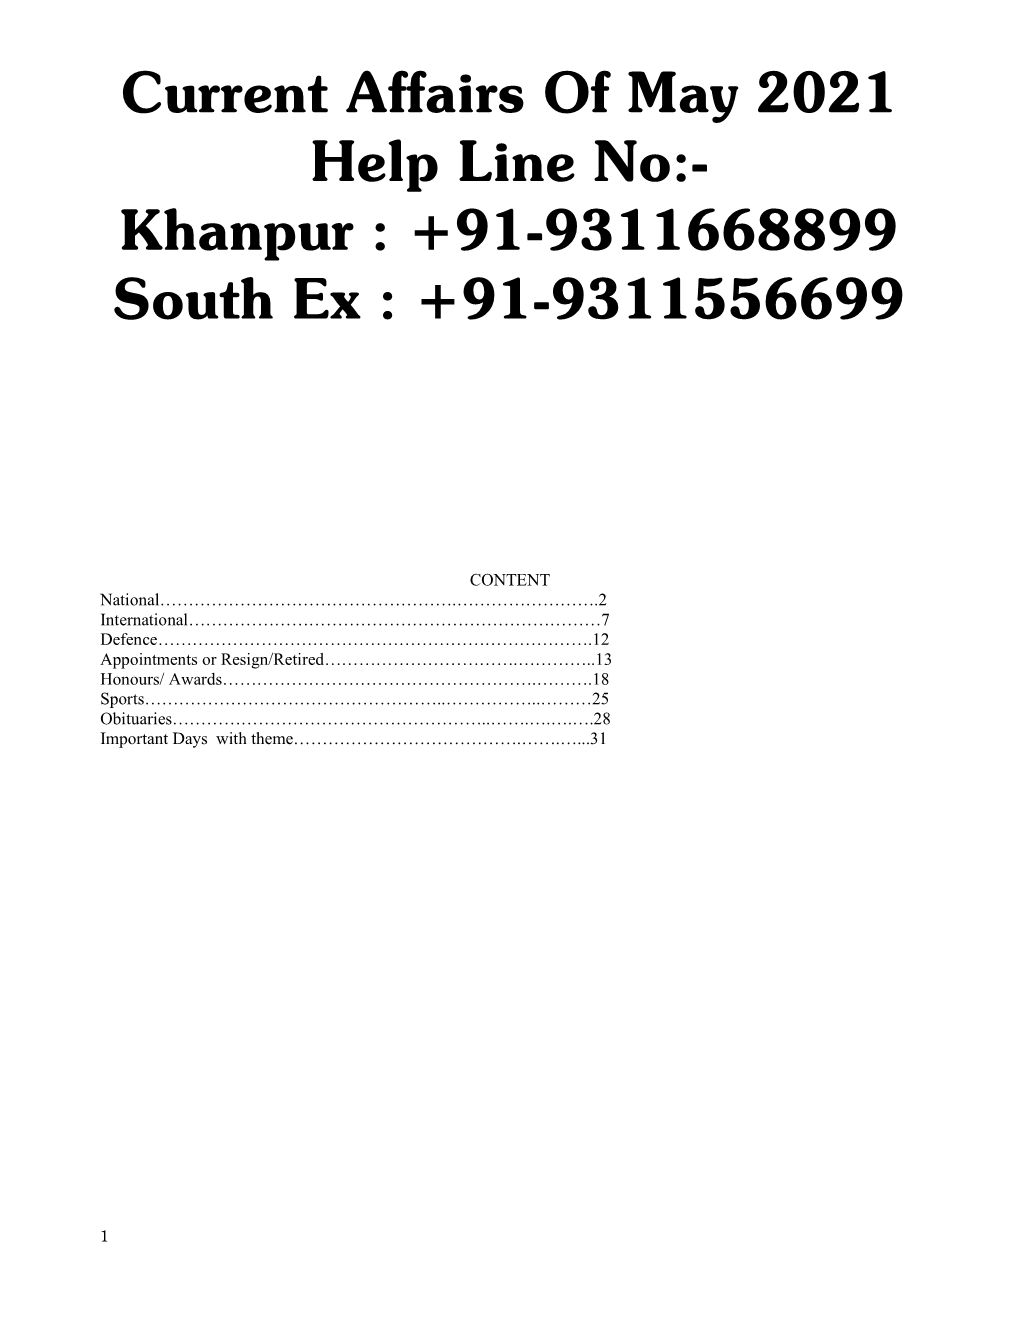 Current Affairs of May 2021 Help Line No:- Khanpur : +91-9311668899 South Ex : +91-9311556699